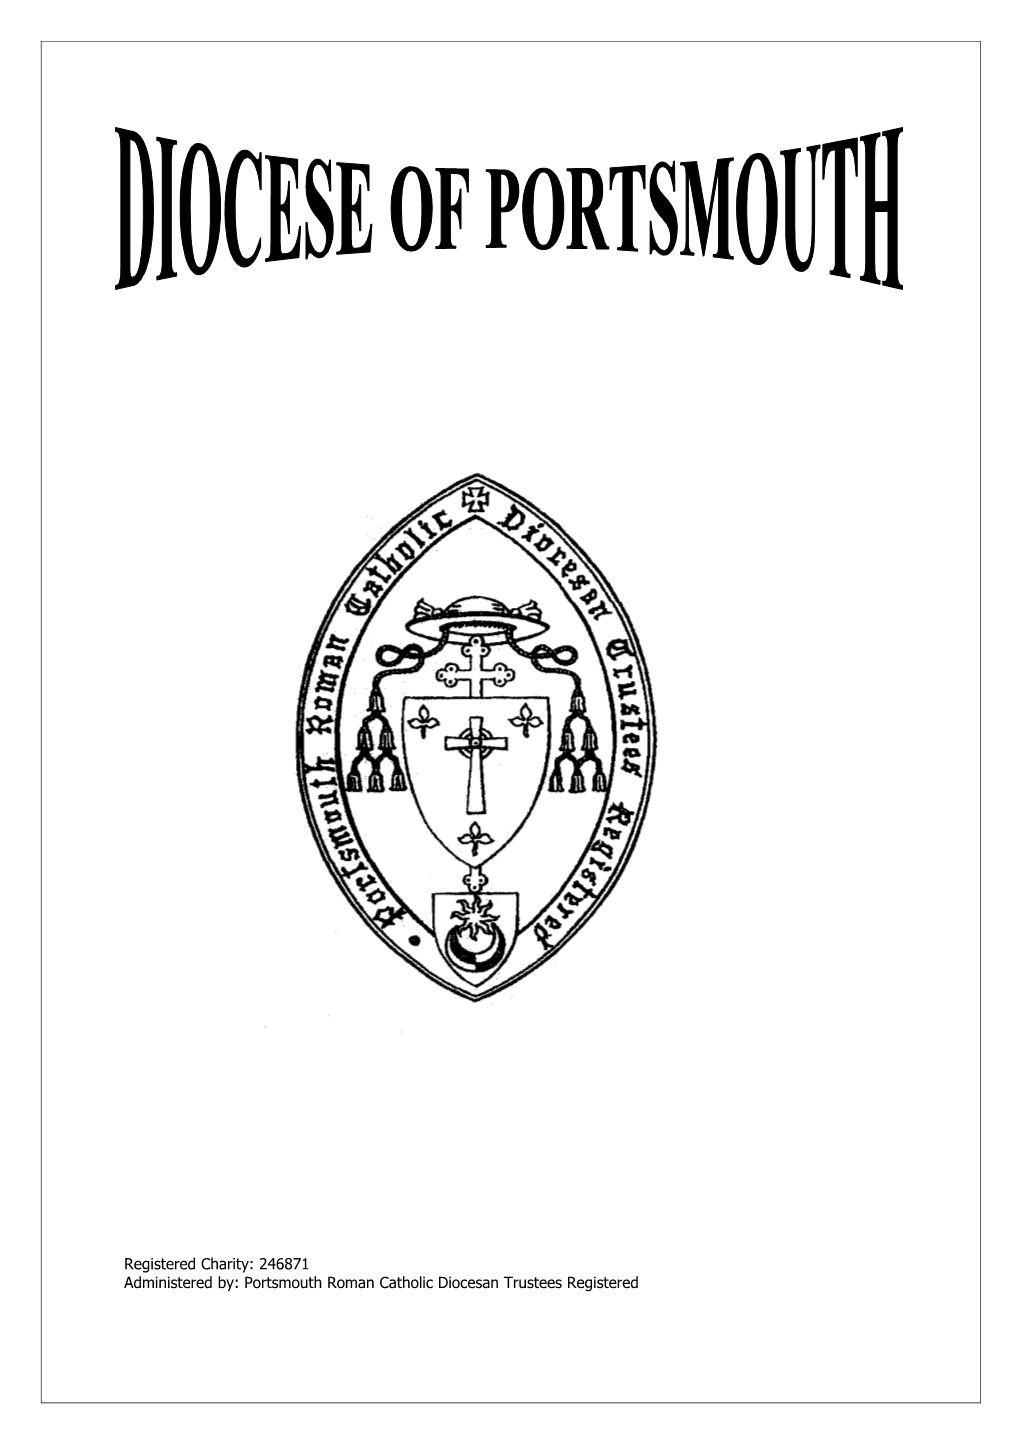 Diocese of Portsmouth